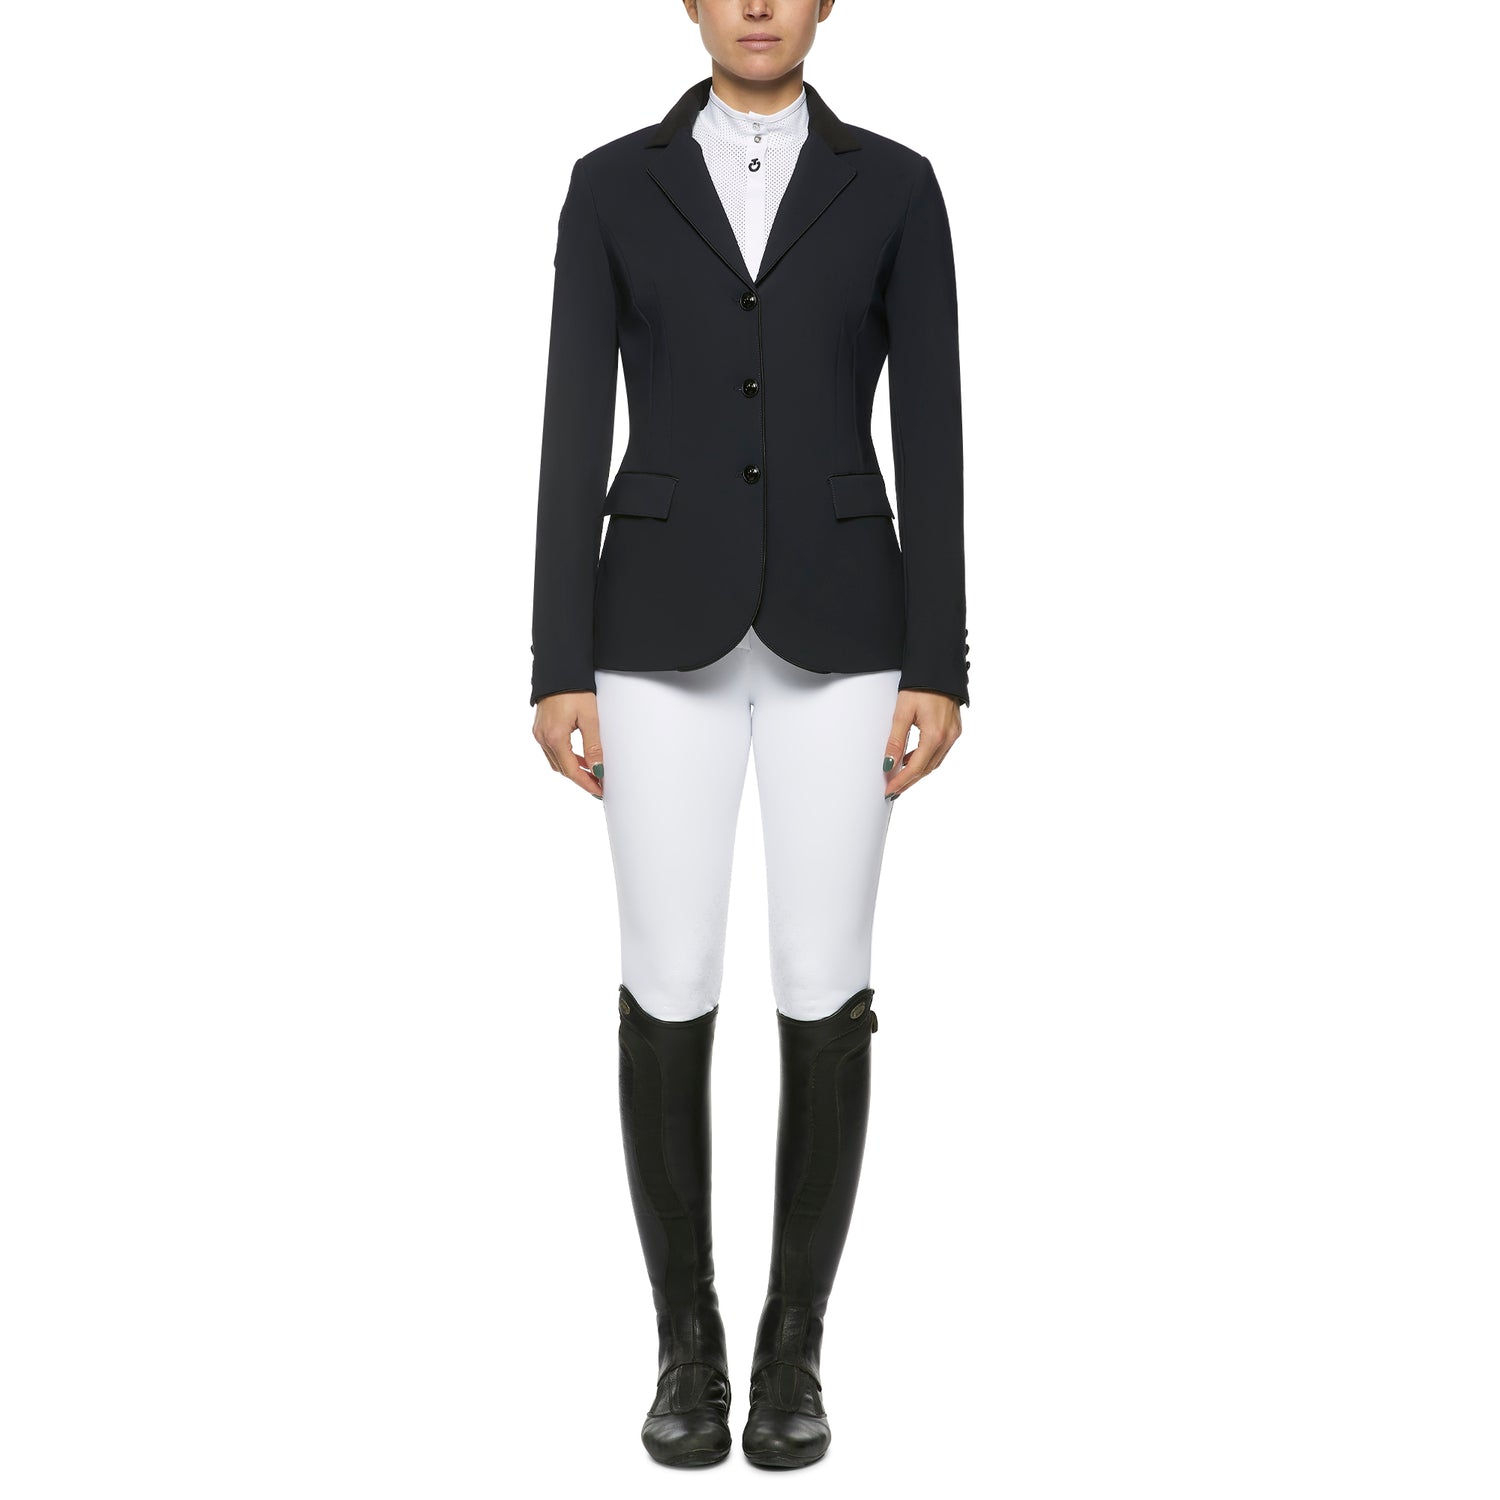 The Cavalleria Toscana GP Riding Jacket competition jacket never goes out of style and exudes typical CT sophistication and quality.  The tailoring is in a class of its own allowing for an extremely flattering fit whilst giving maximum movement when riding. The luxury soft stretchy jersey is comfortable, easy to care for and doesn&